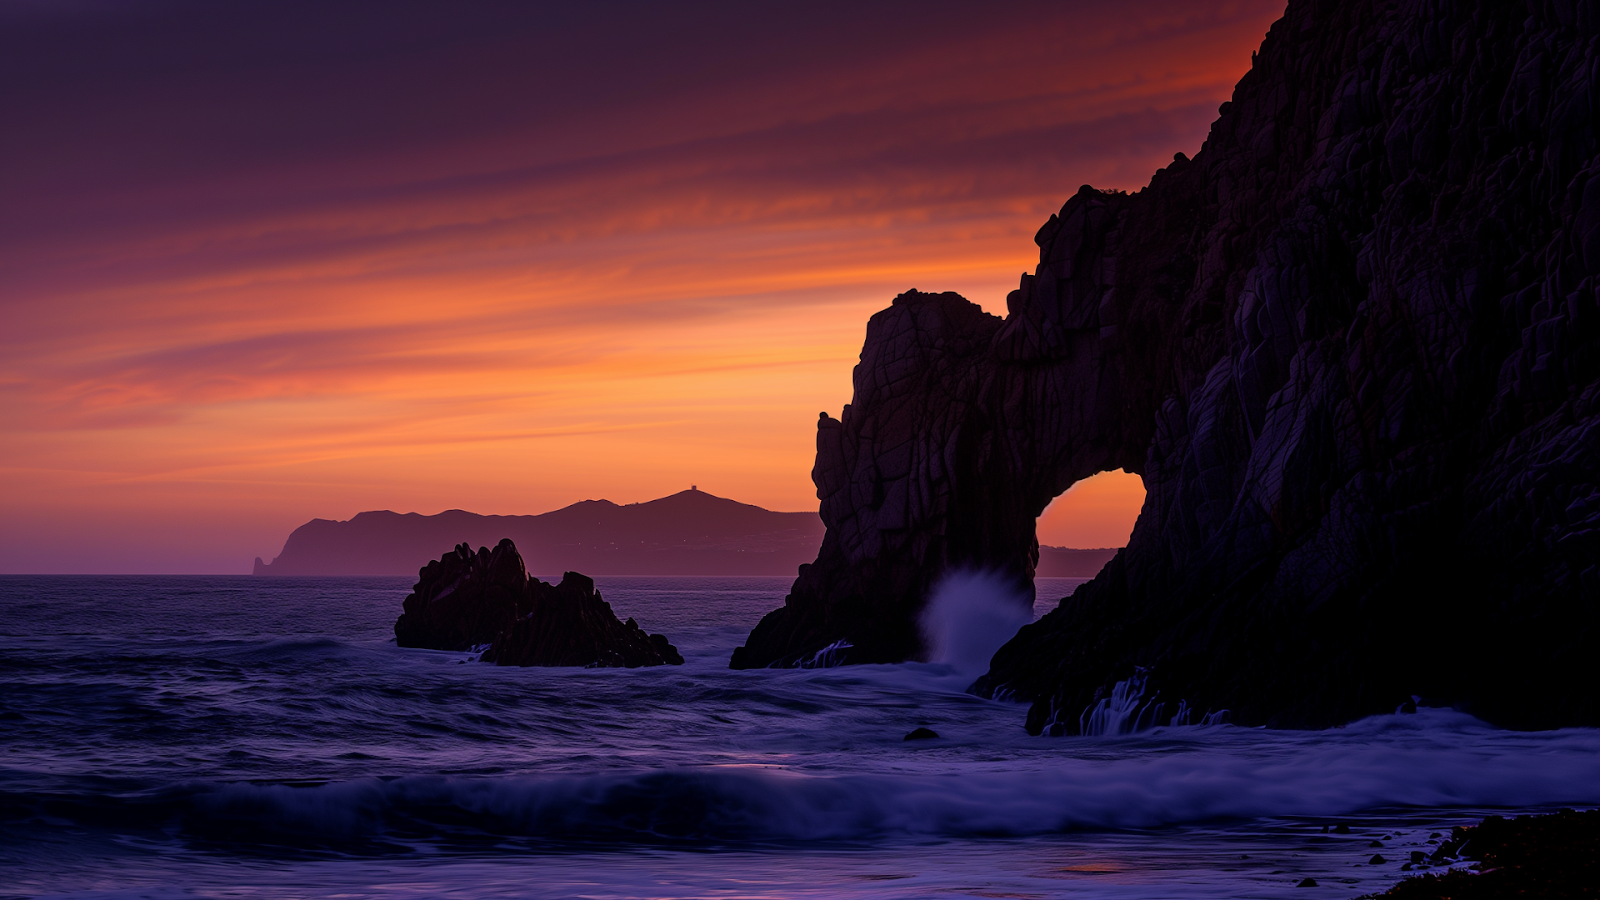 Silhouette of the Arch of Cabo San Lucas against a colorful sunrise sky, Los Cabos, Mexico.